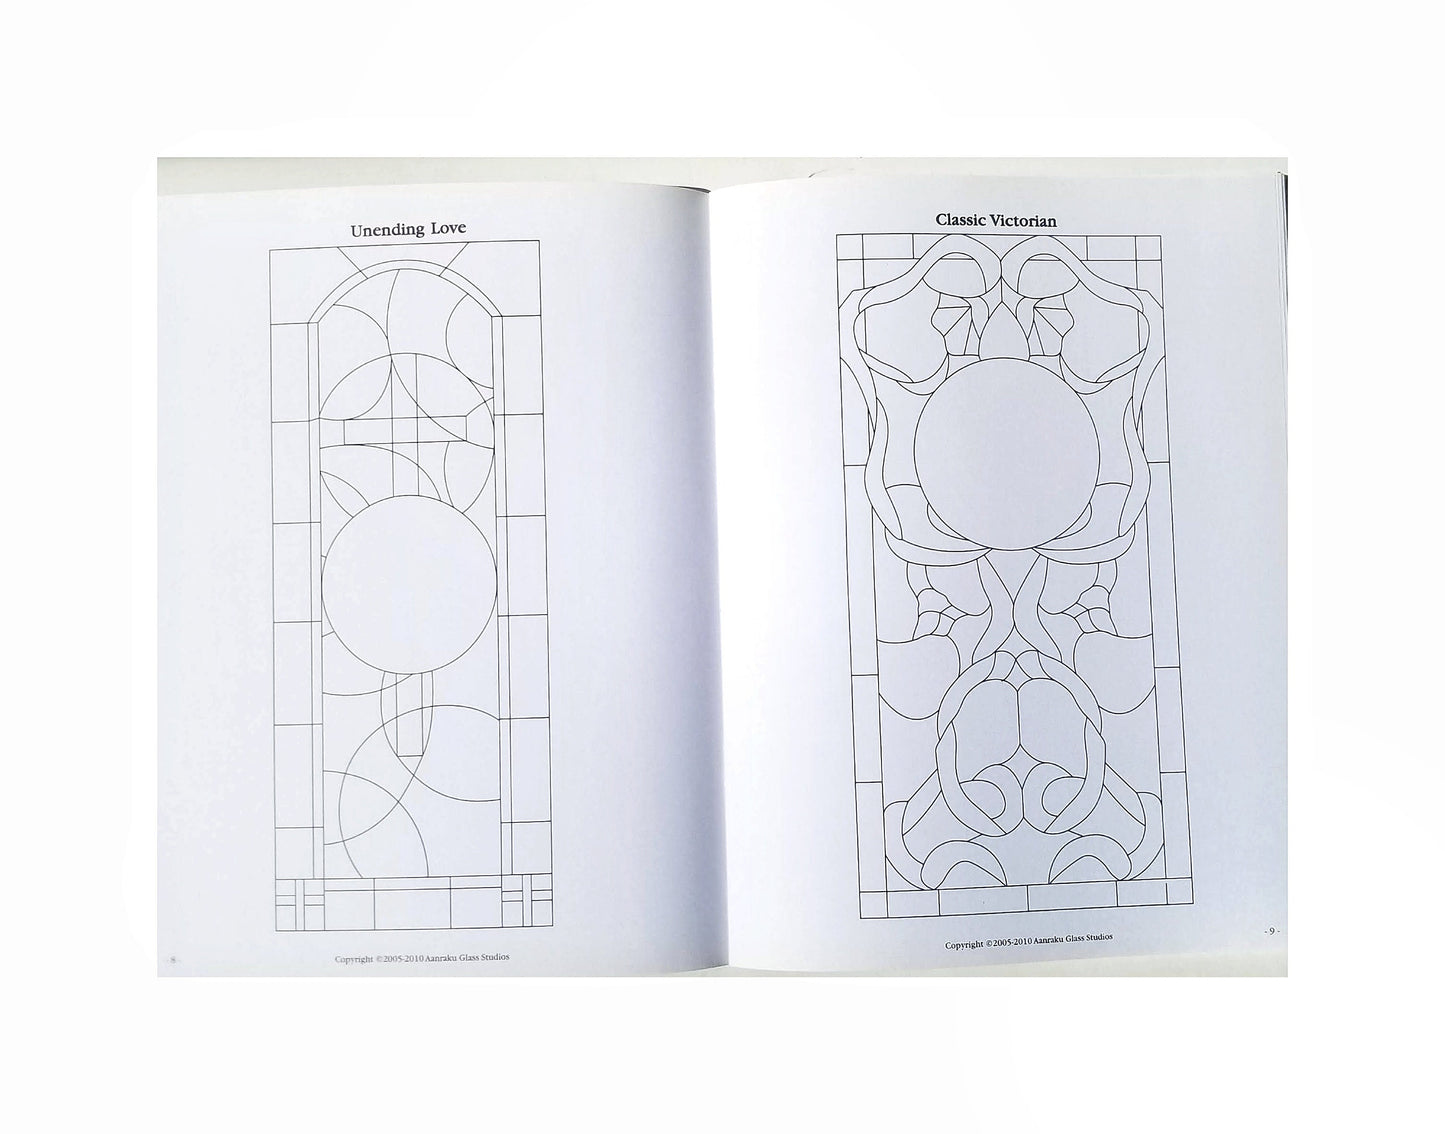 Stained Glass Patterns, Religious, Christan Themed, Church Window Design. Circular Panels, Large Leaded Glass.